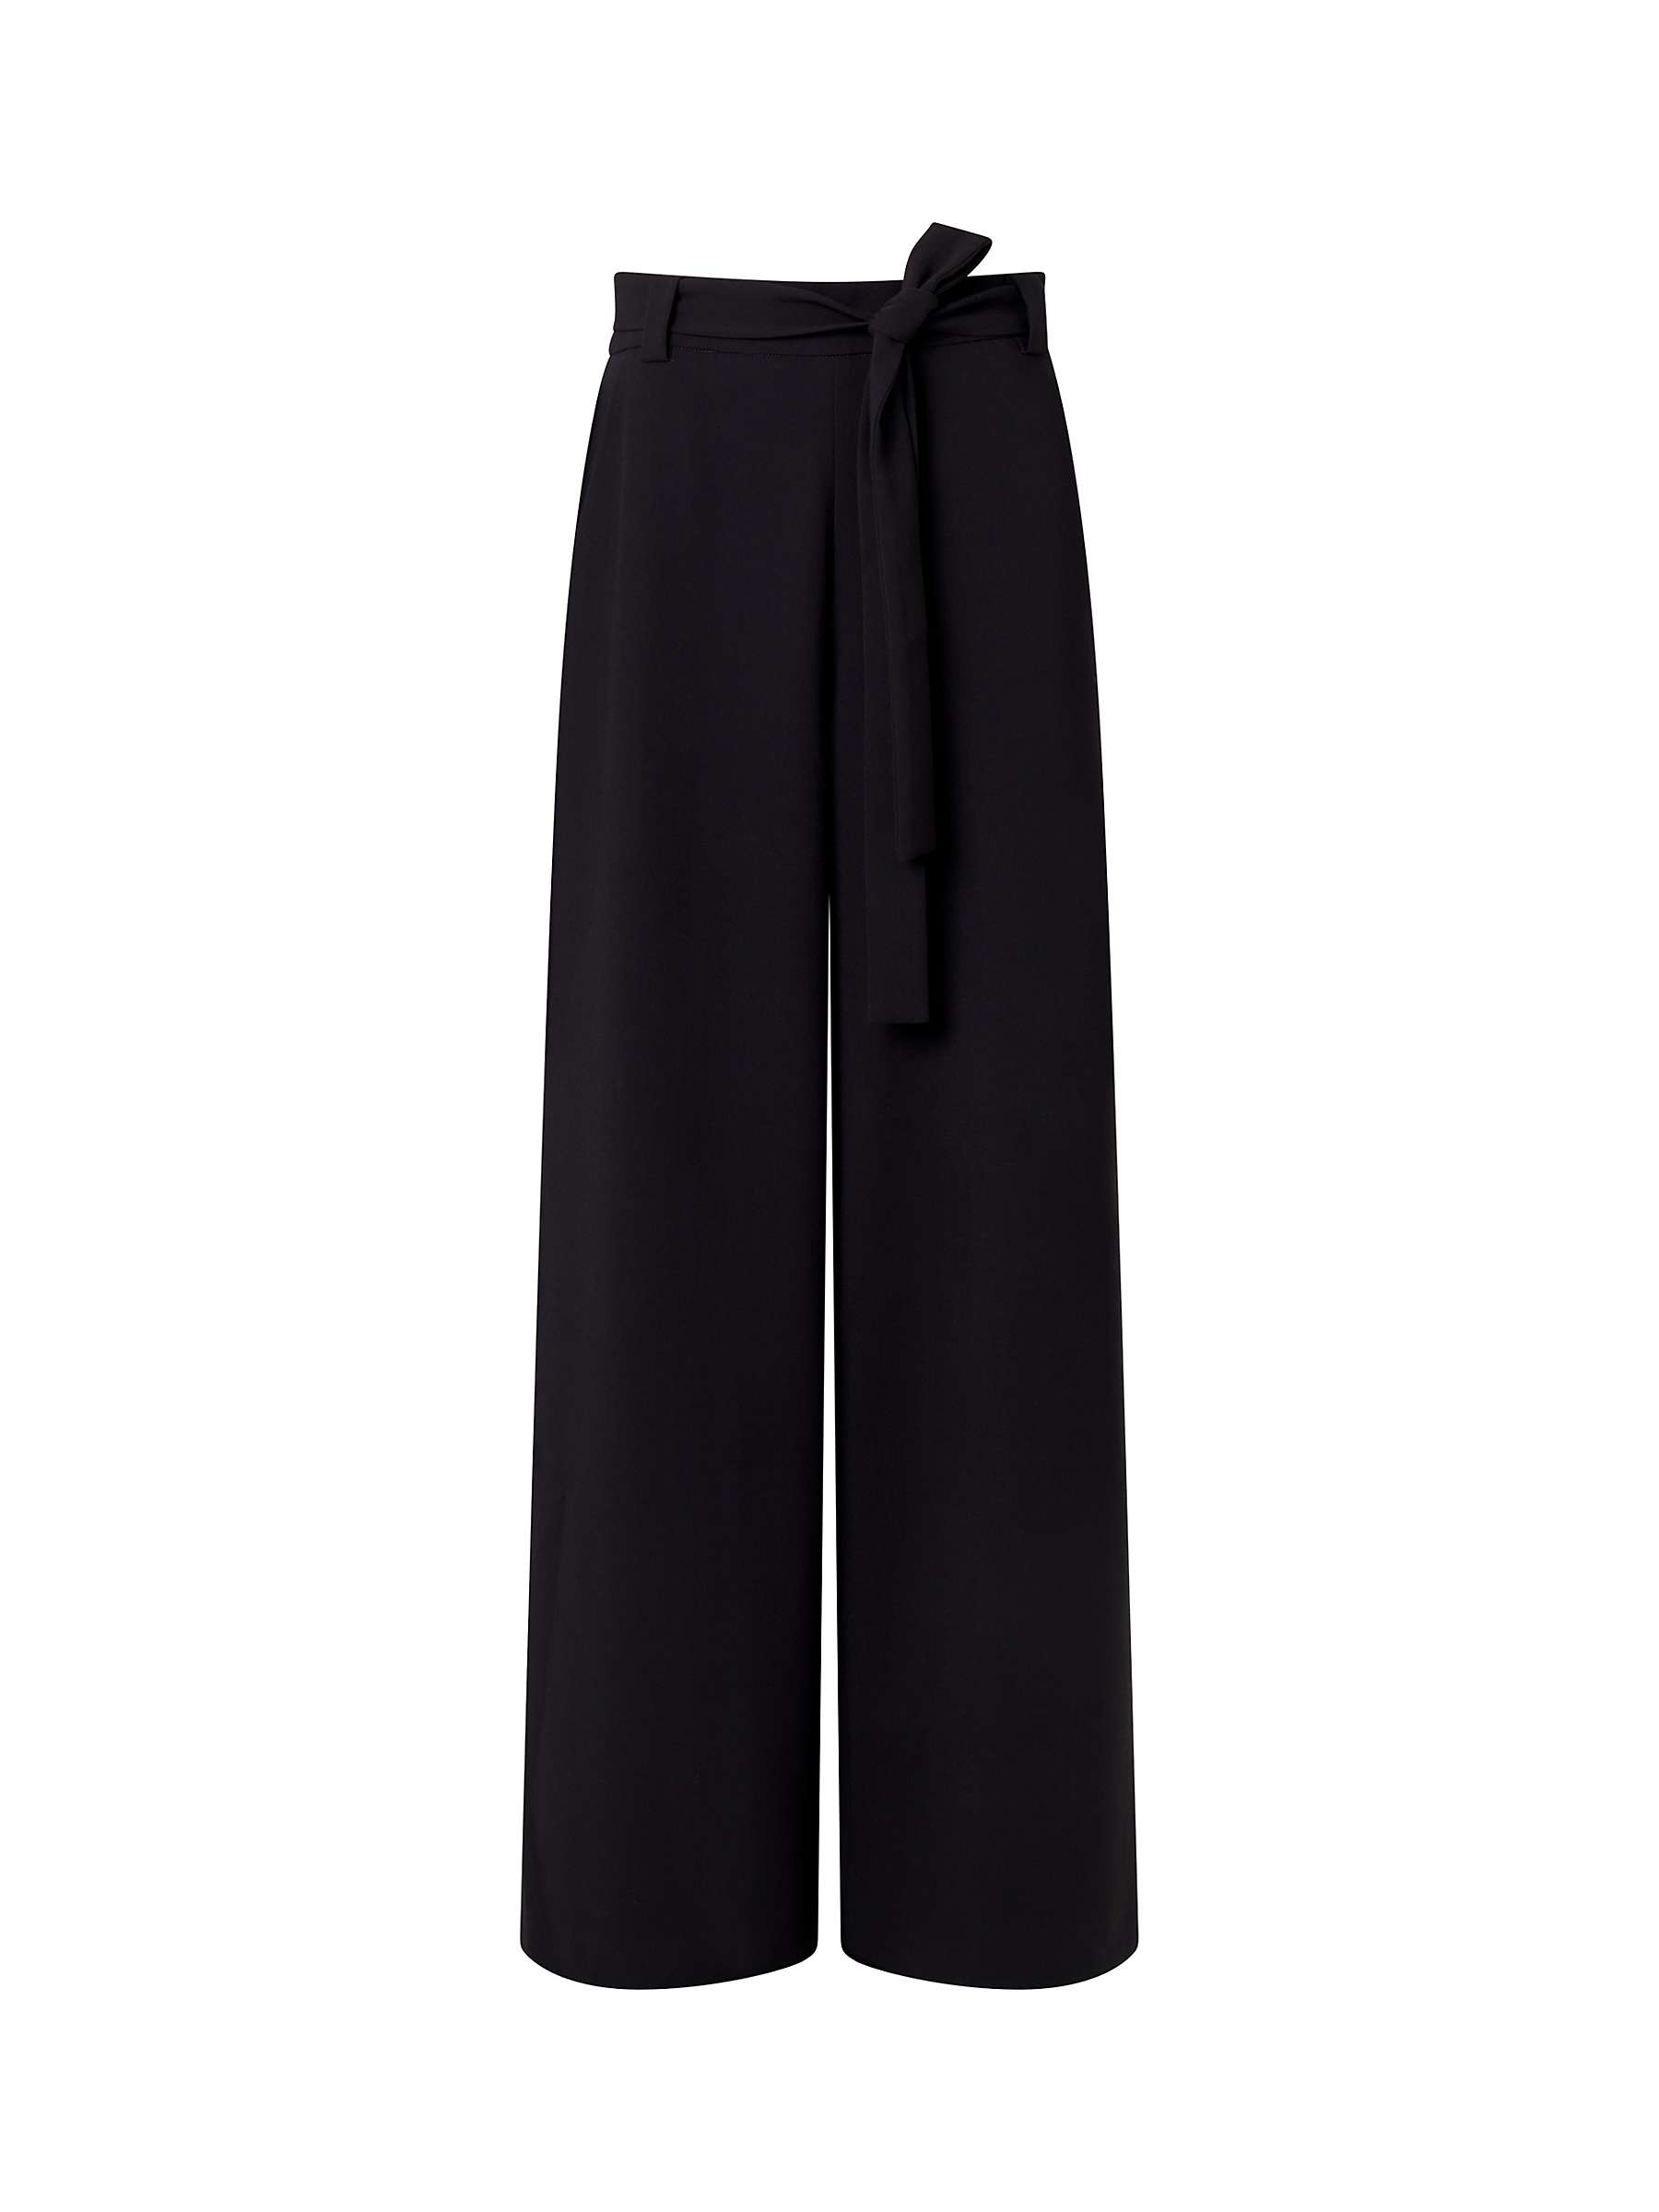 French Connection Wisper Full Length Palazzo Trousers, Black at John ...